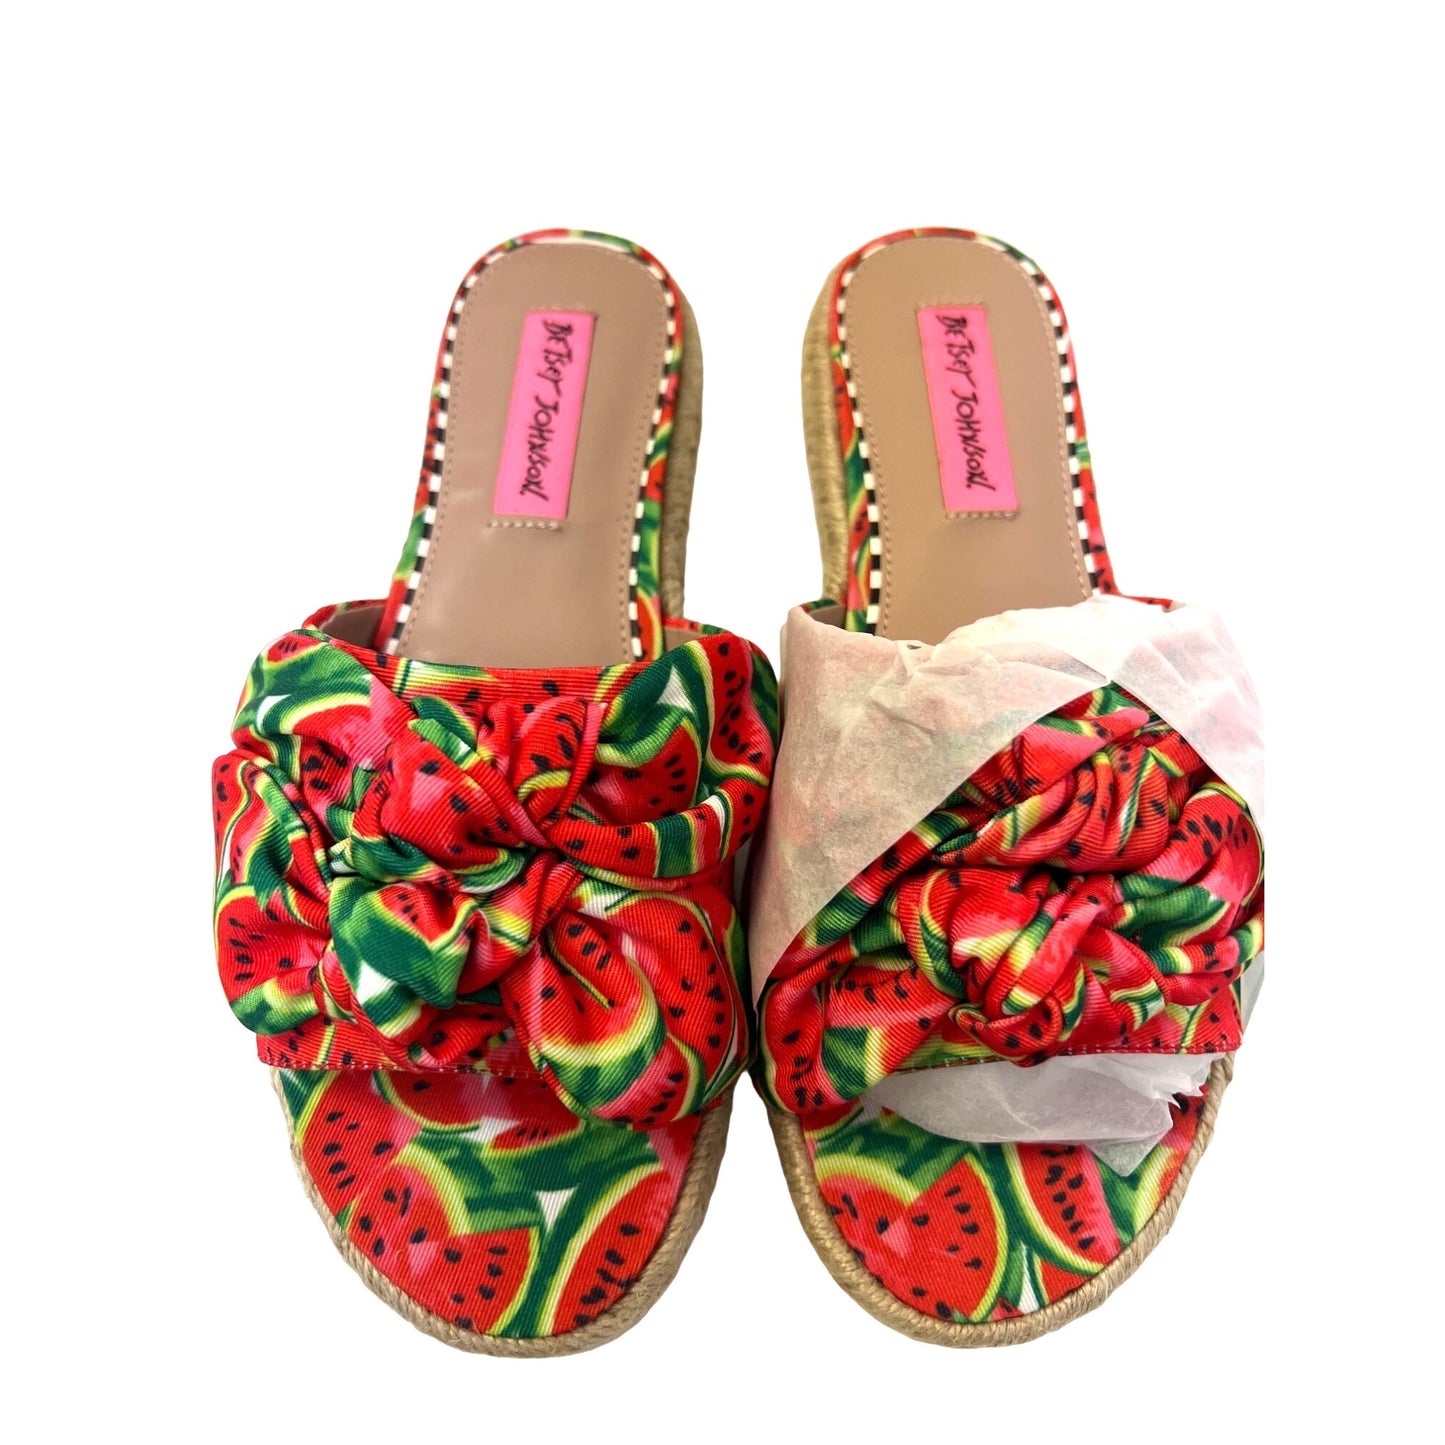 Betsy Johnson NWT Jazzy Red Watermelon Sandal Slides